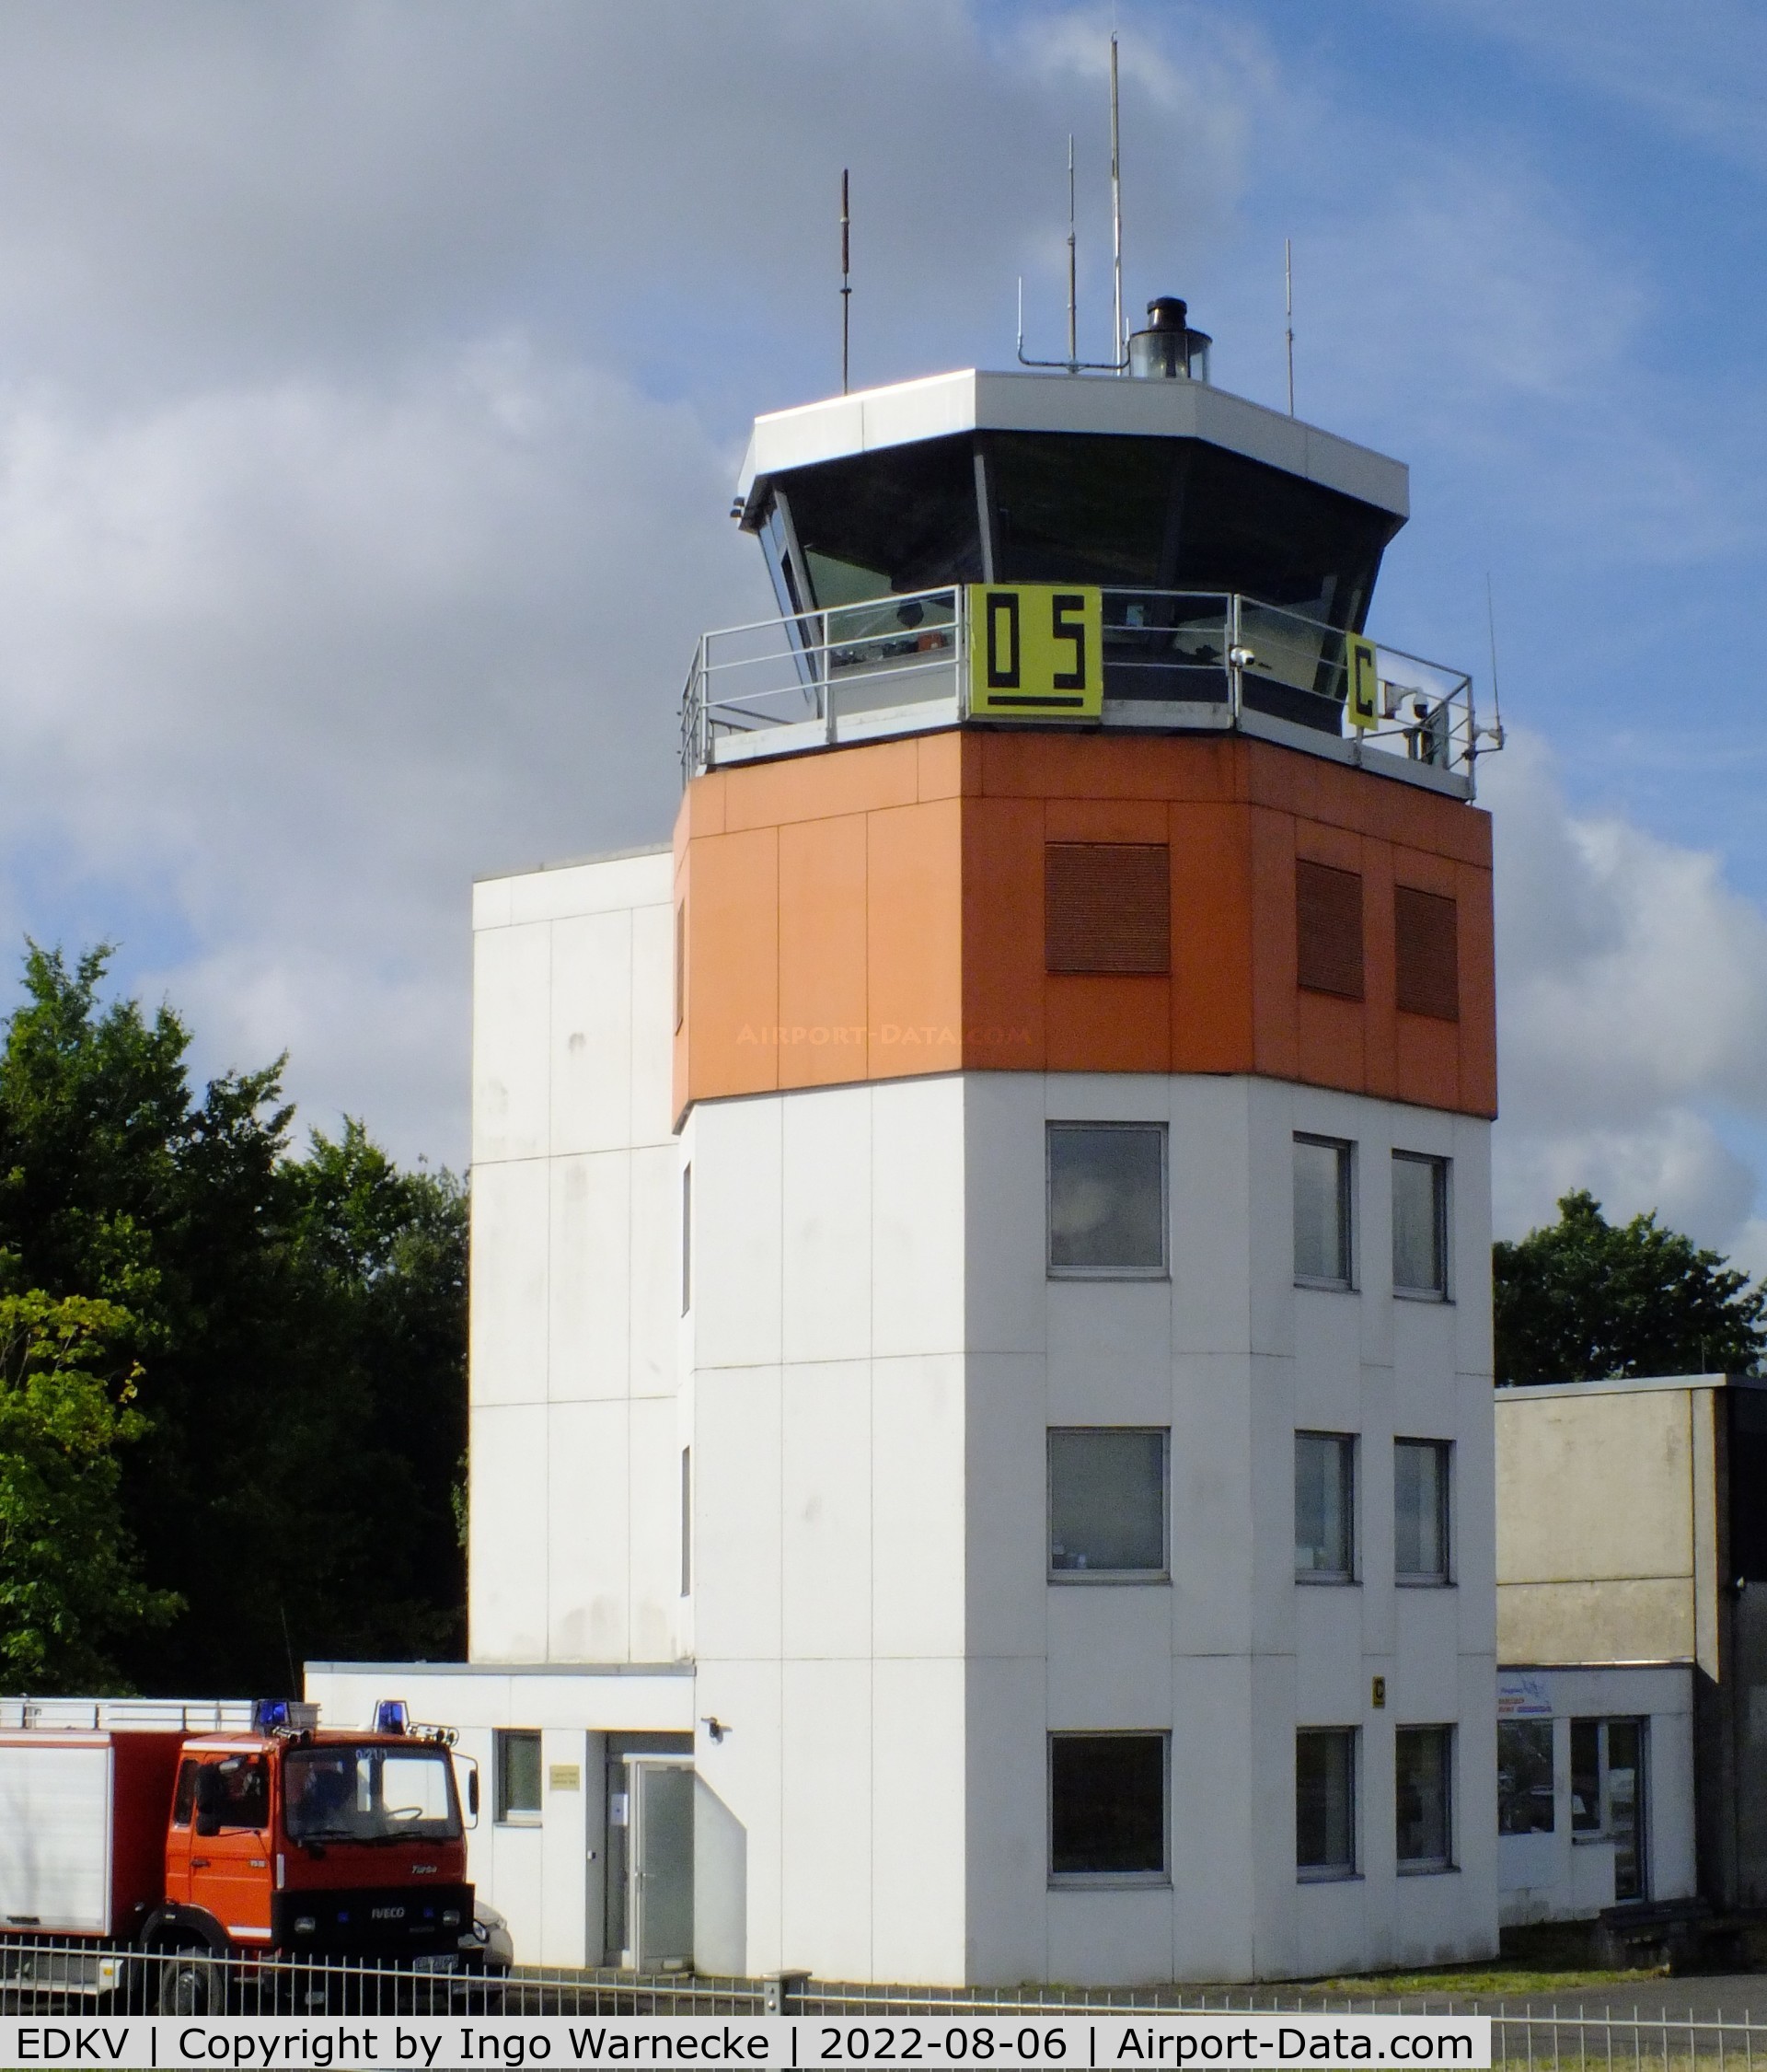 Dahlemer Binz Airport, Dahlem Germany (EDKV) - the tower at Dahlemer Binz airfield